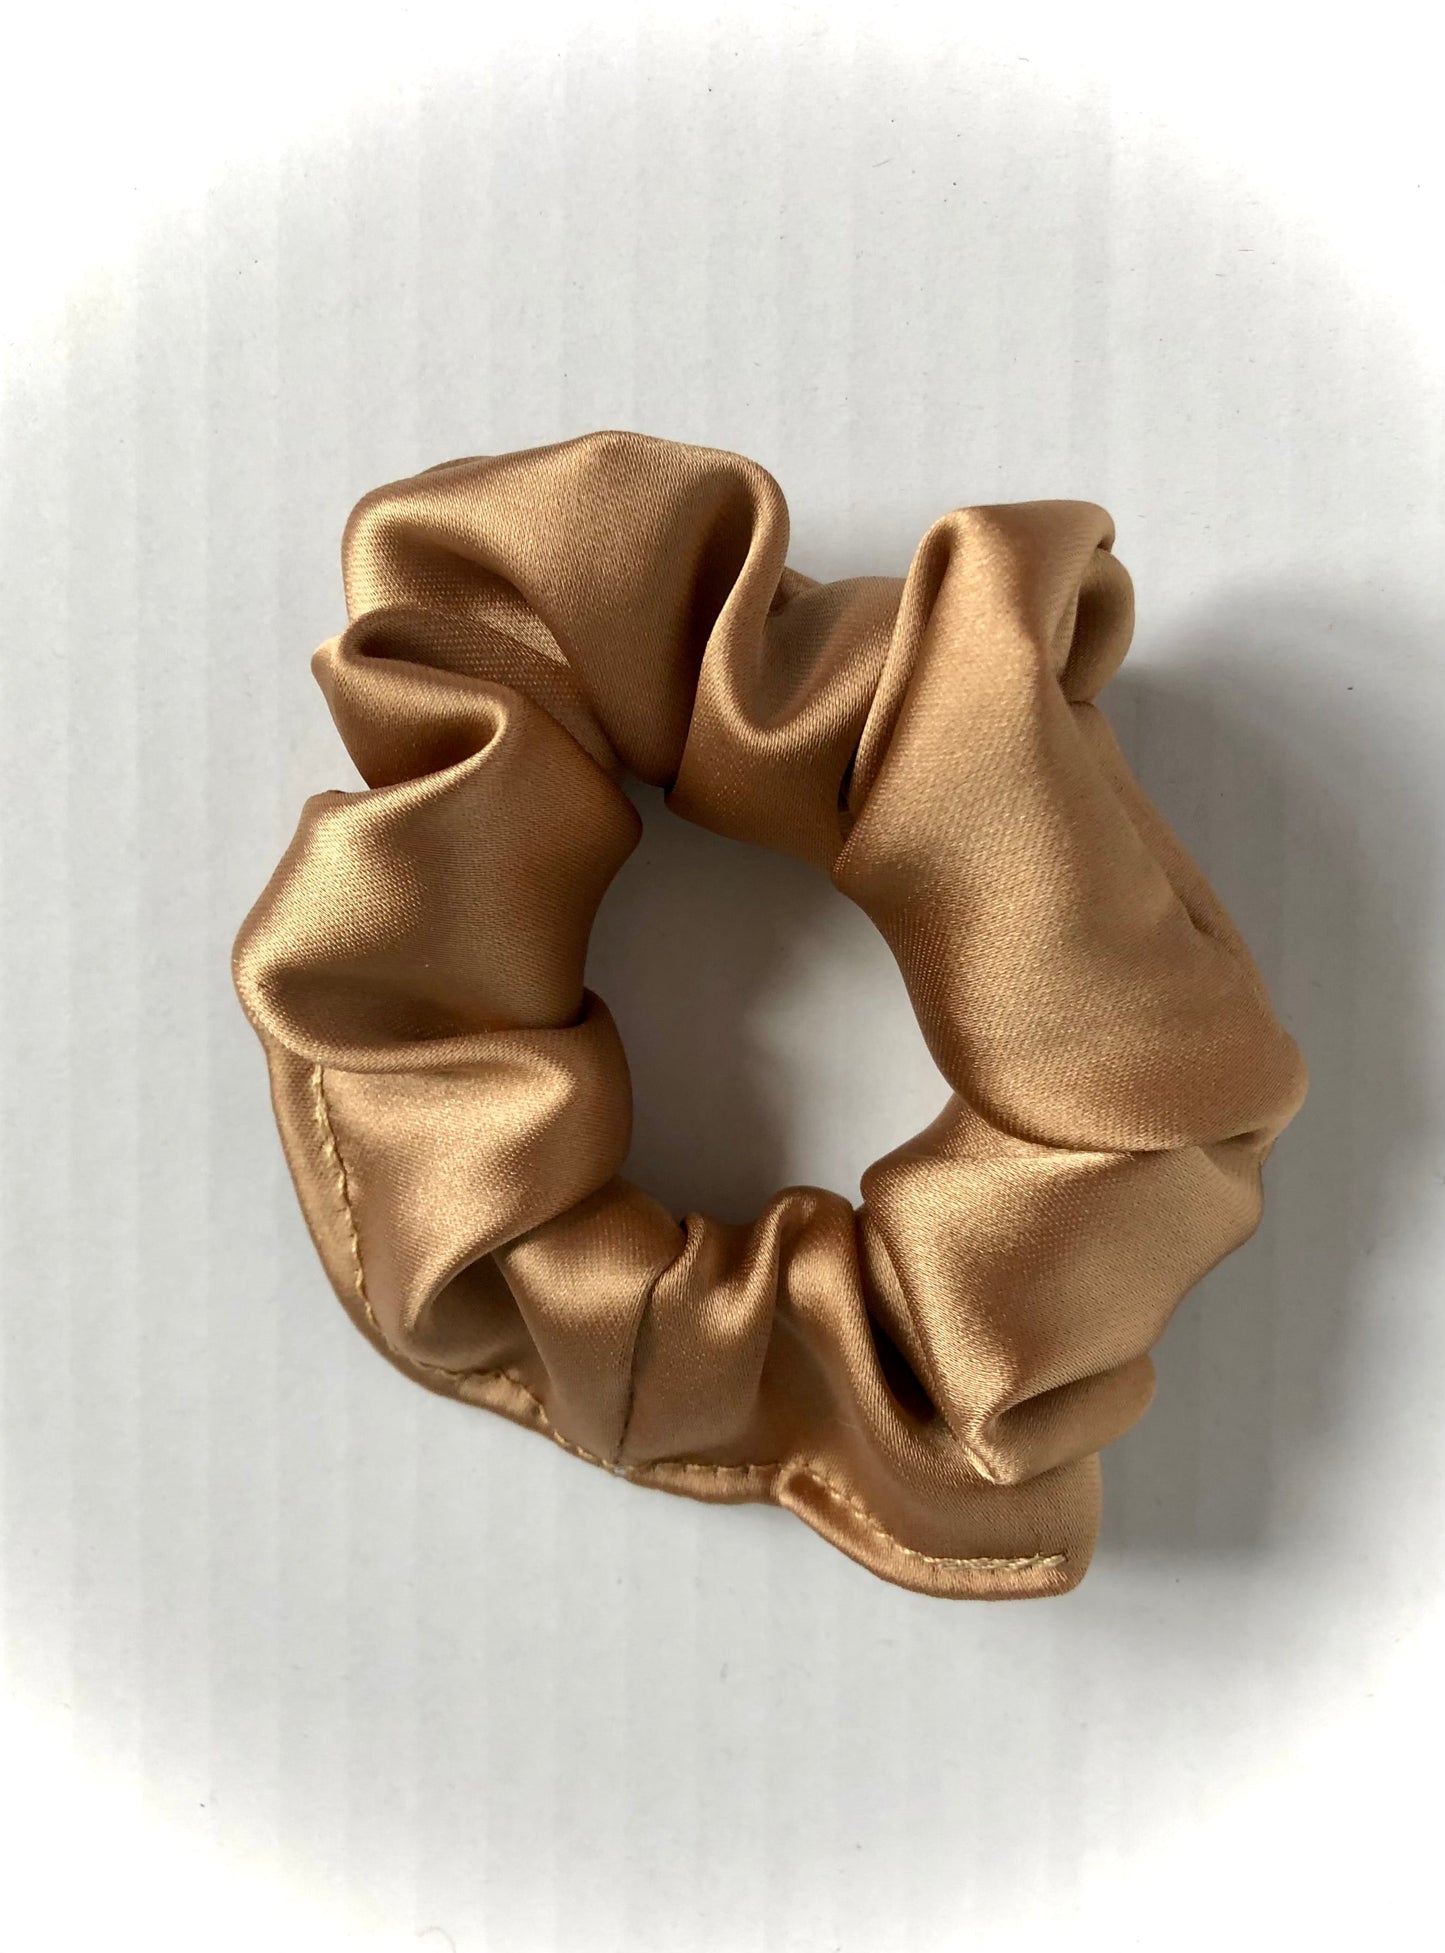 Satin Scrunchie - three sizes and colours